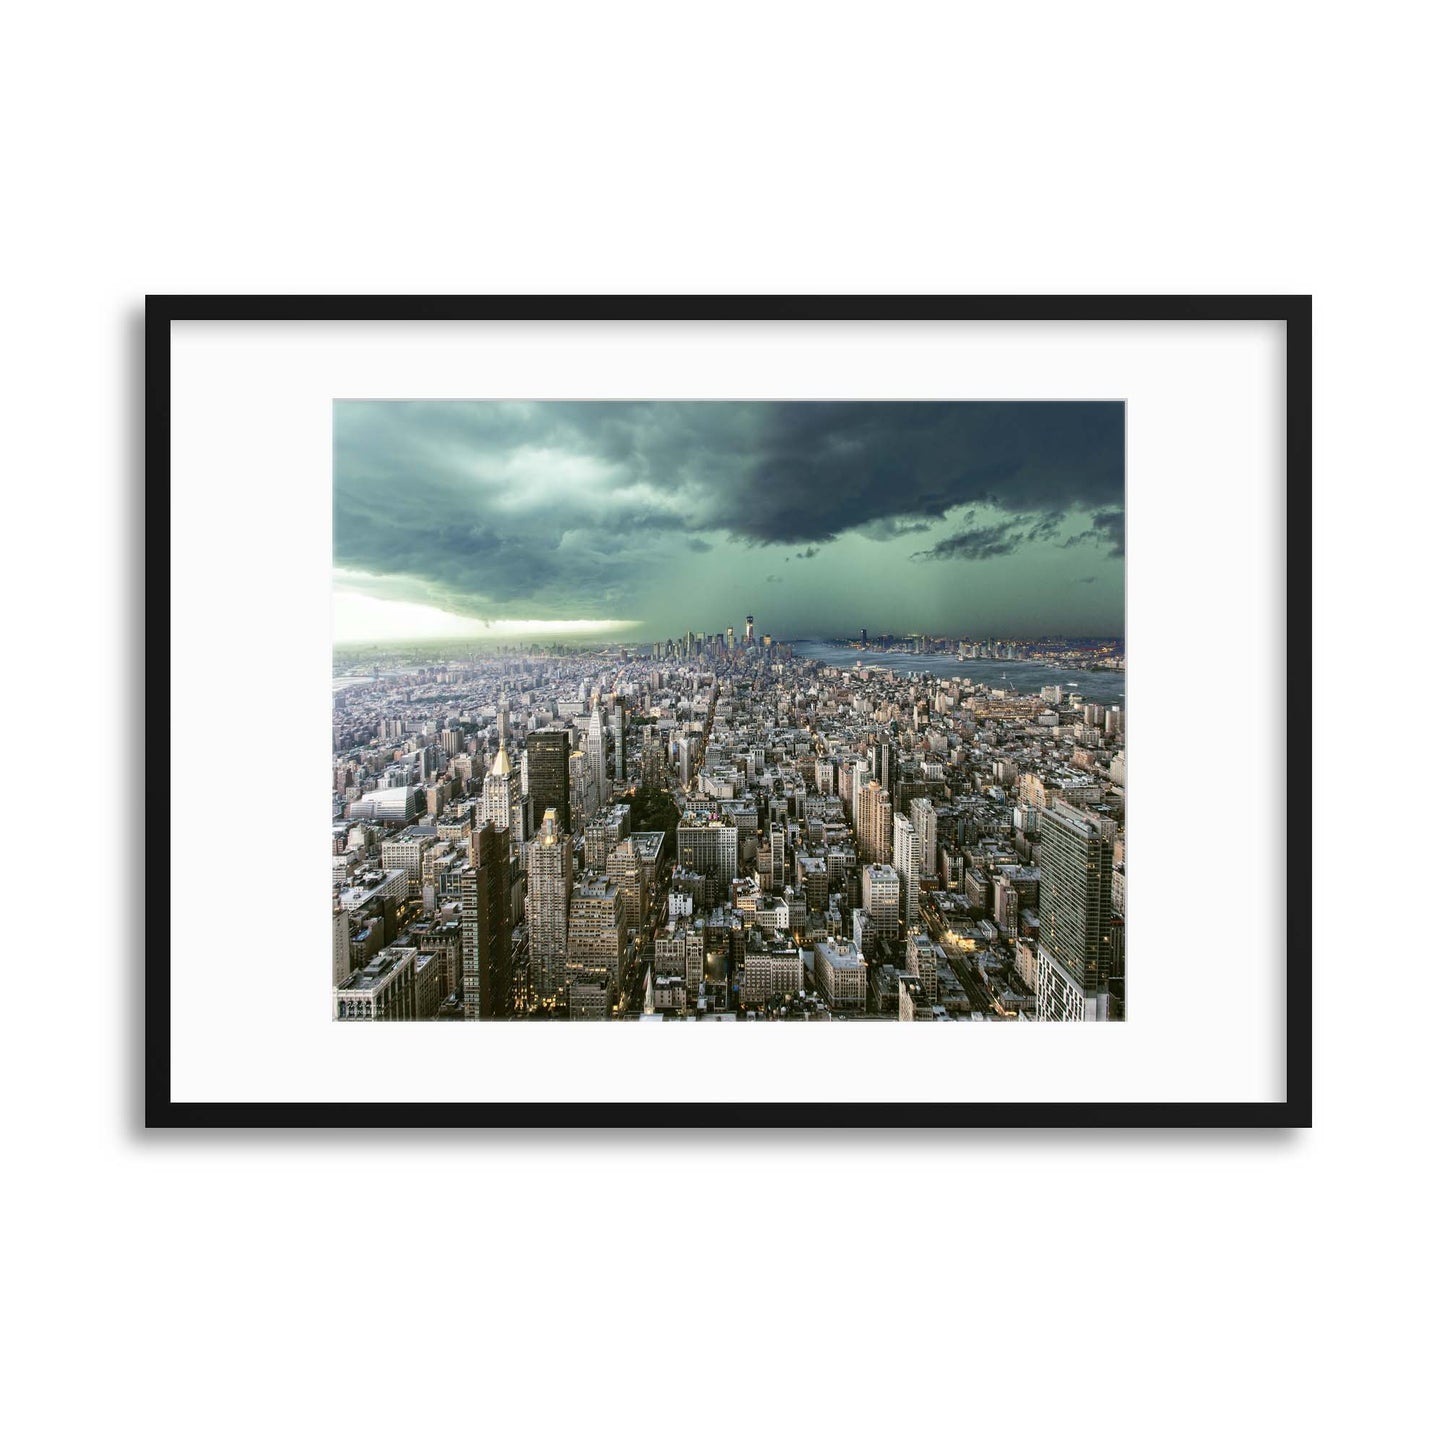 New-York under storm by Pagniez Framed Print - USTAD HOME